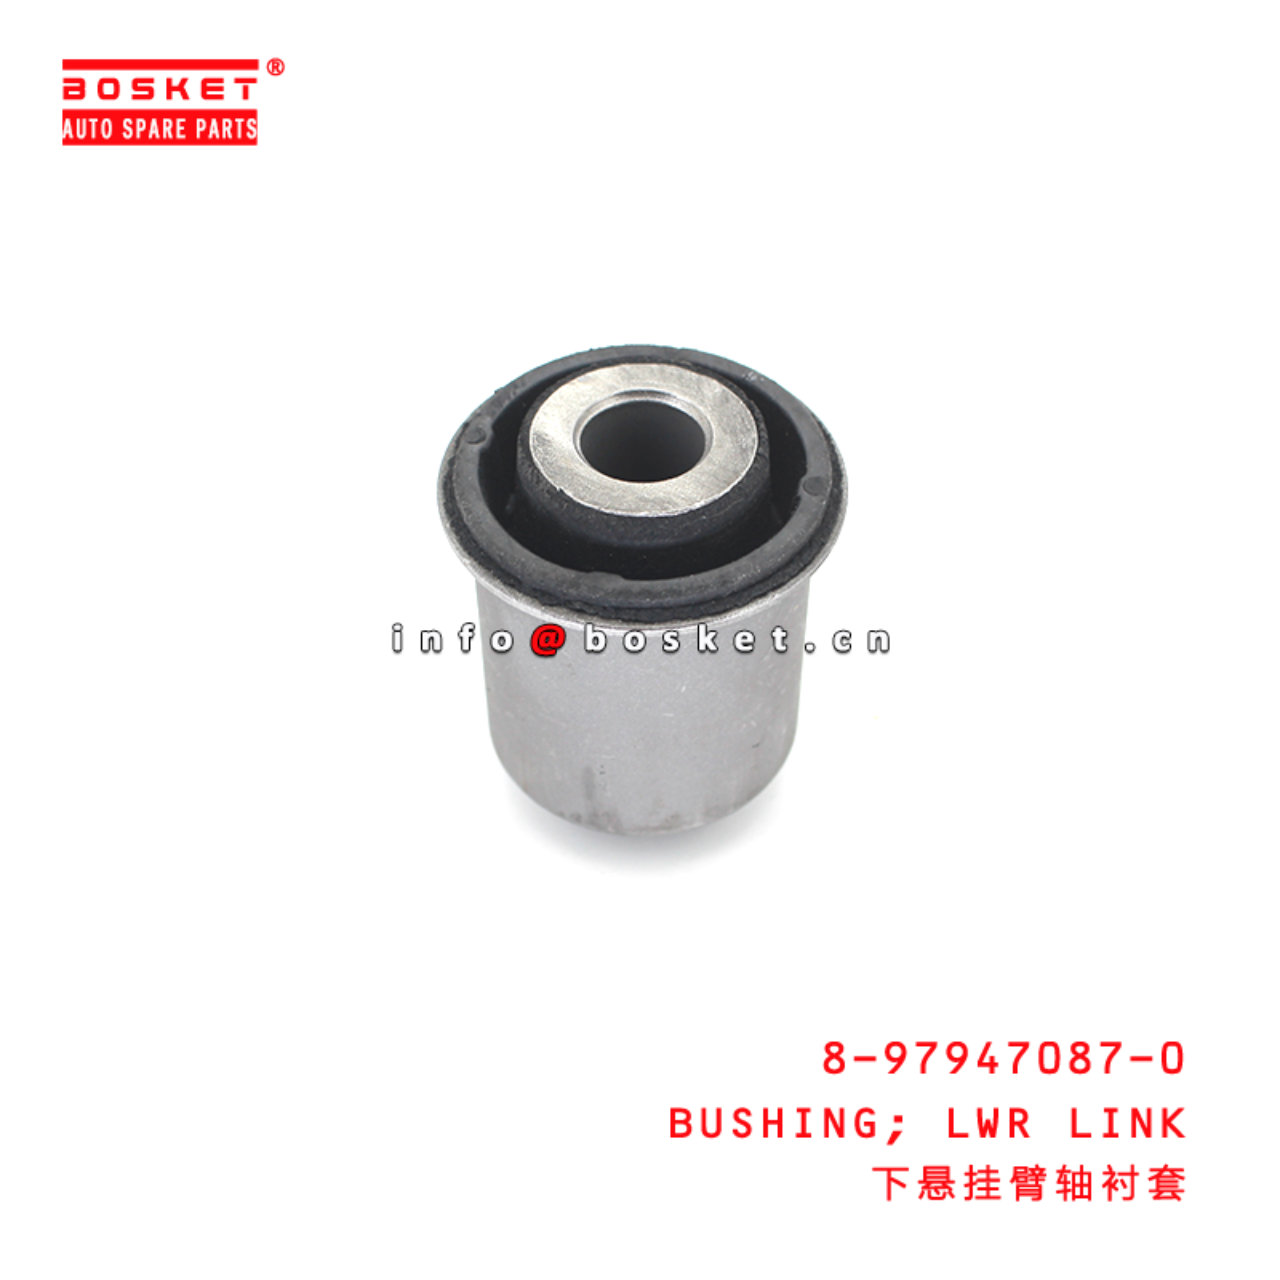 8-97947087-0 Lower Link Buhing suitable for ISUZU D-MAX 8979470870